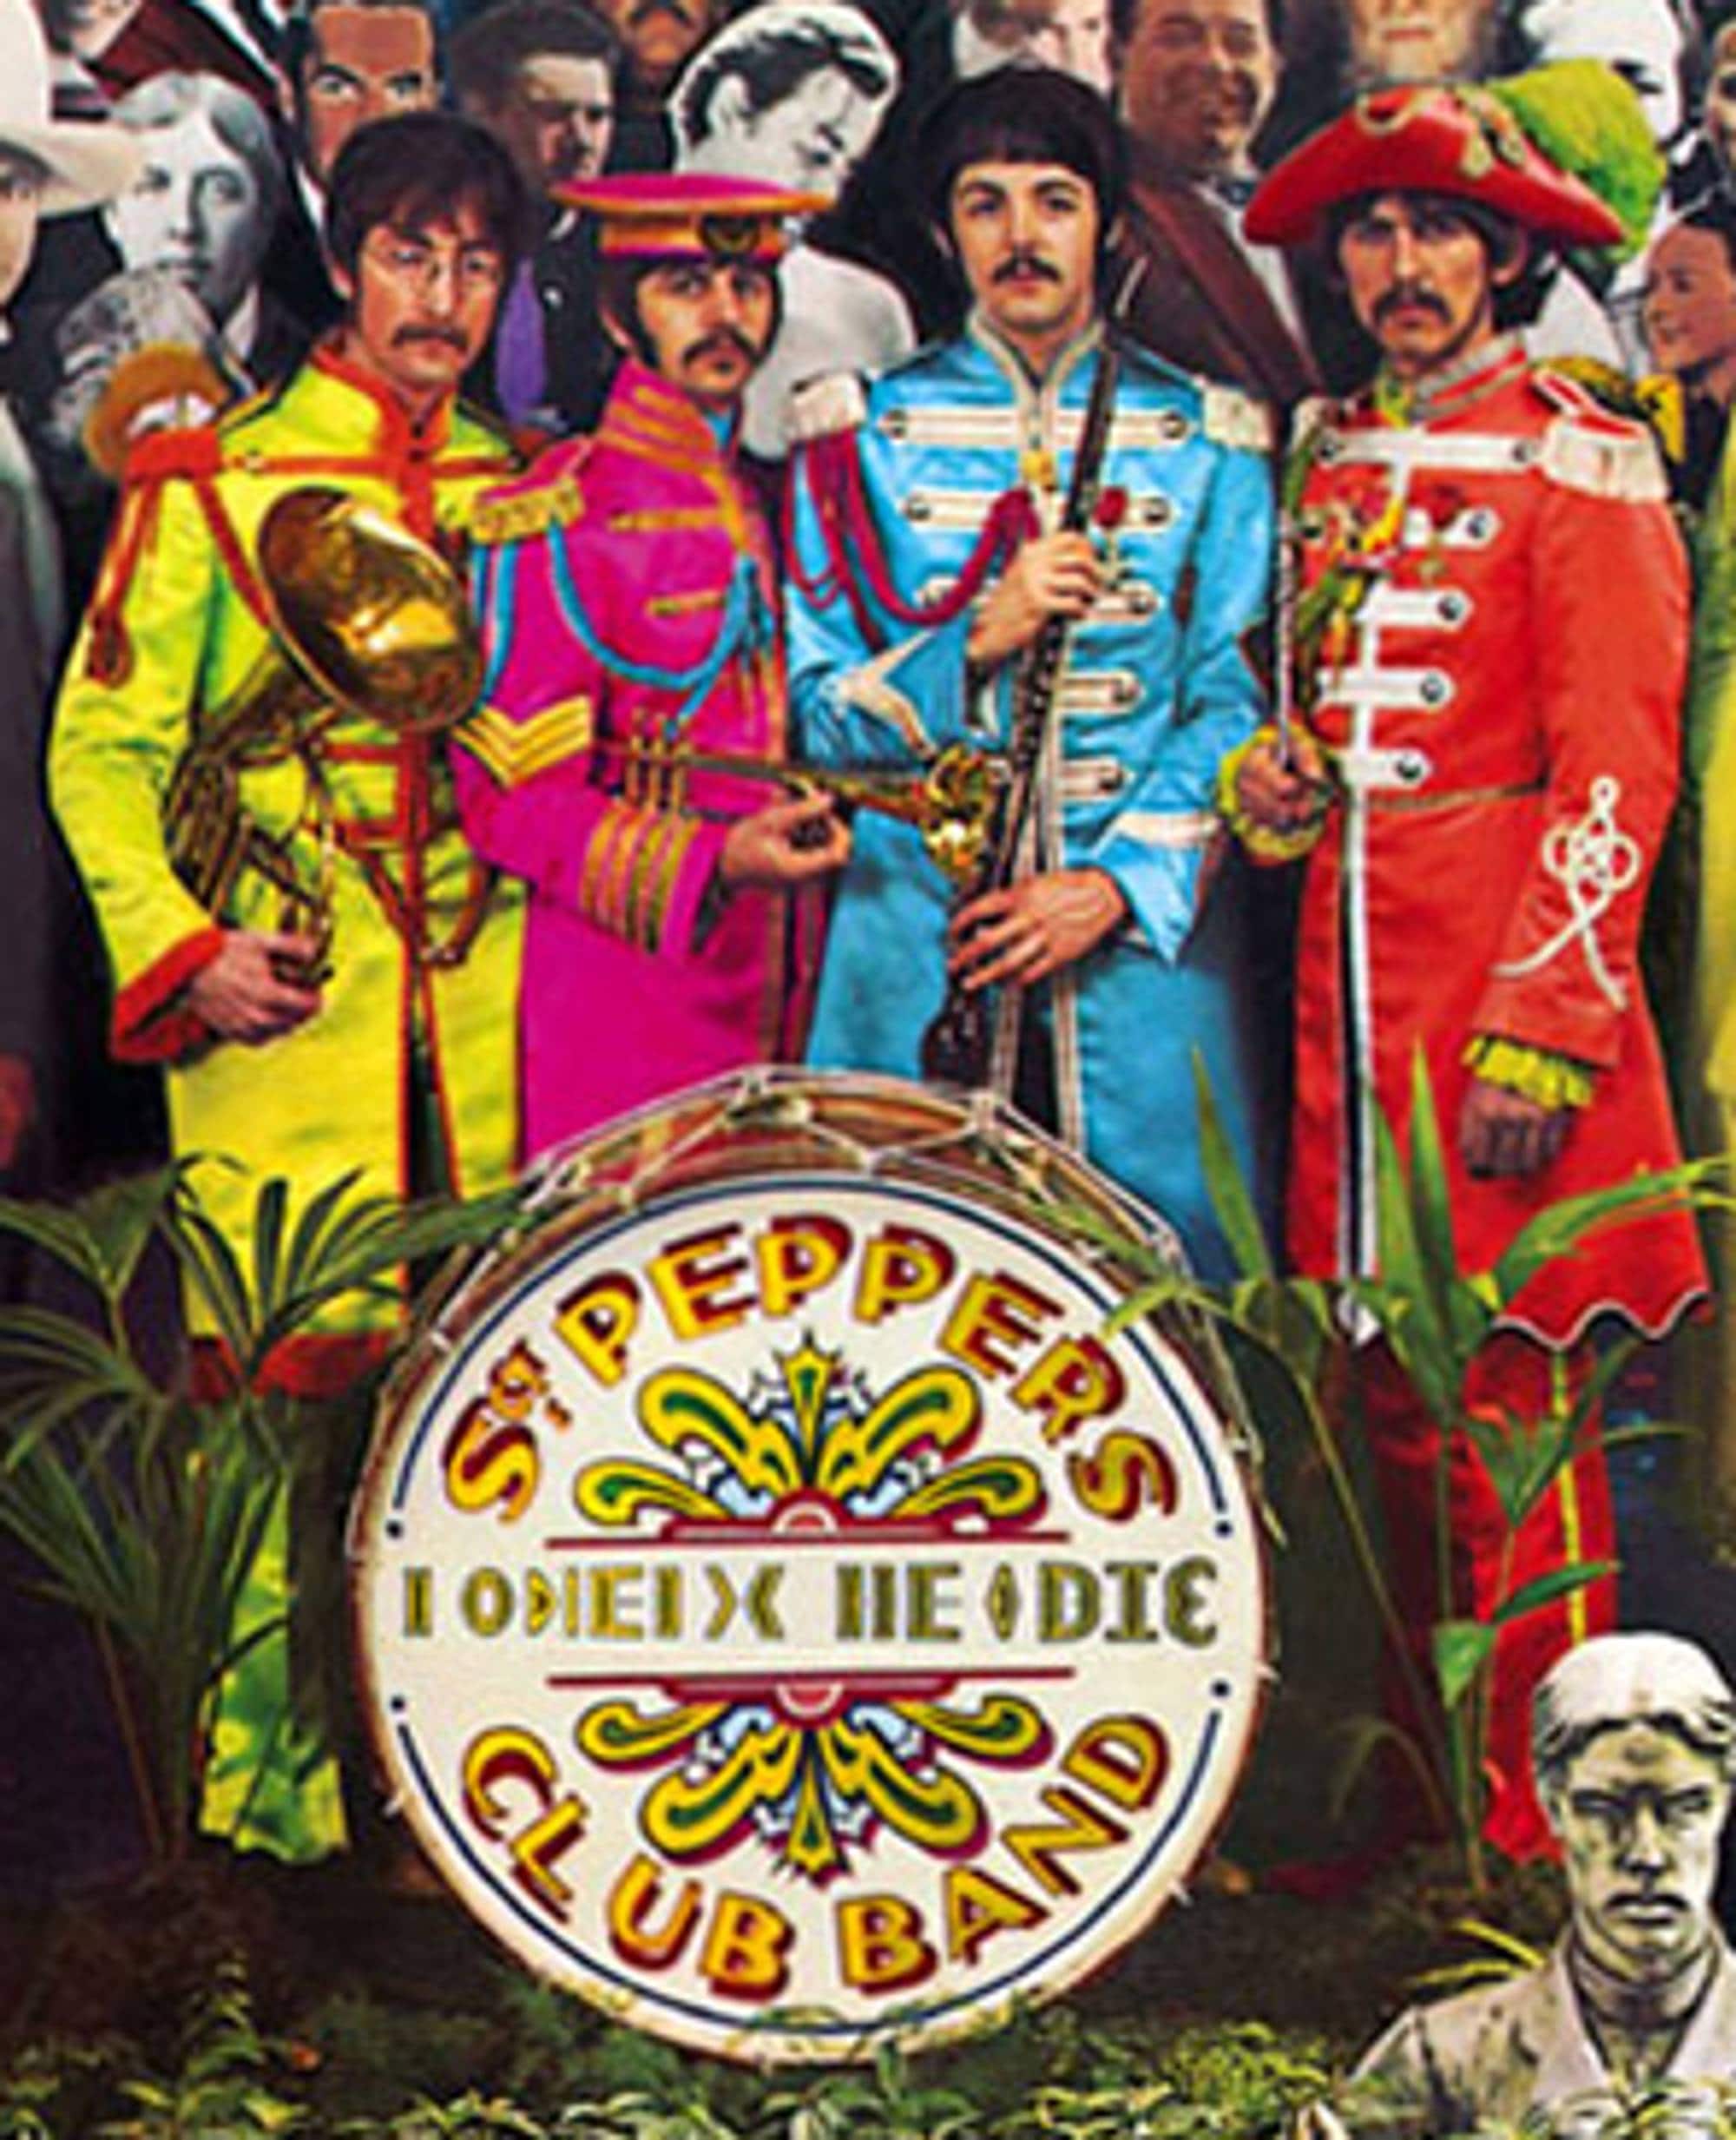 Beatles sgt pepper lonely. Обложка альбома Битлз Sgt Pepper s Lonely Hearts Club Band. Обложка Битлз сержант Пеппер. The Beatles Sgt. Pepper's Lonely Hearts Club Band обложка. Sgt. Pepper's Lonely Hearts Club Band Битлз.